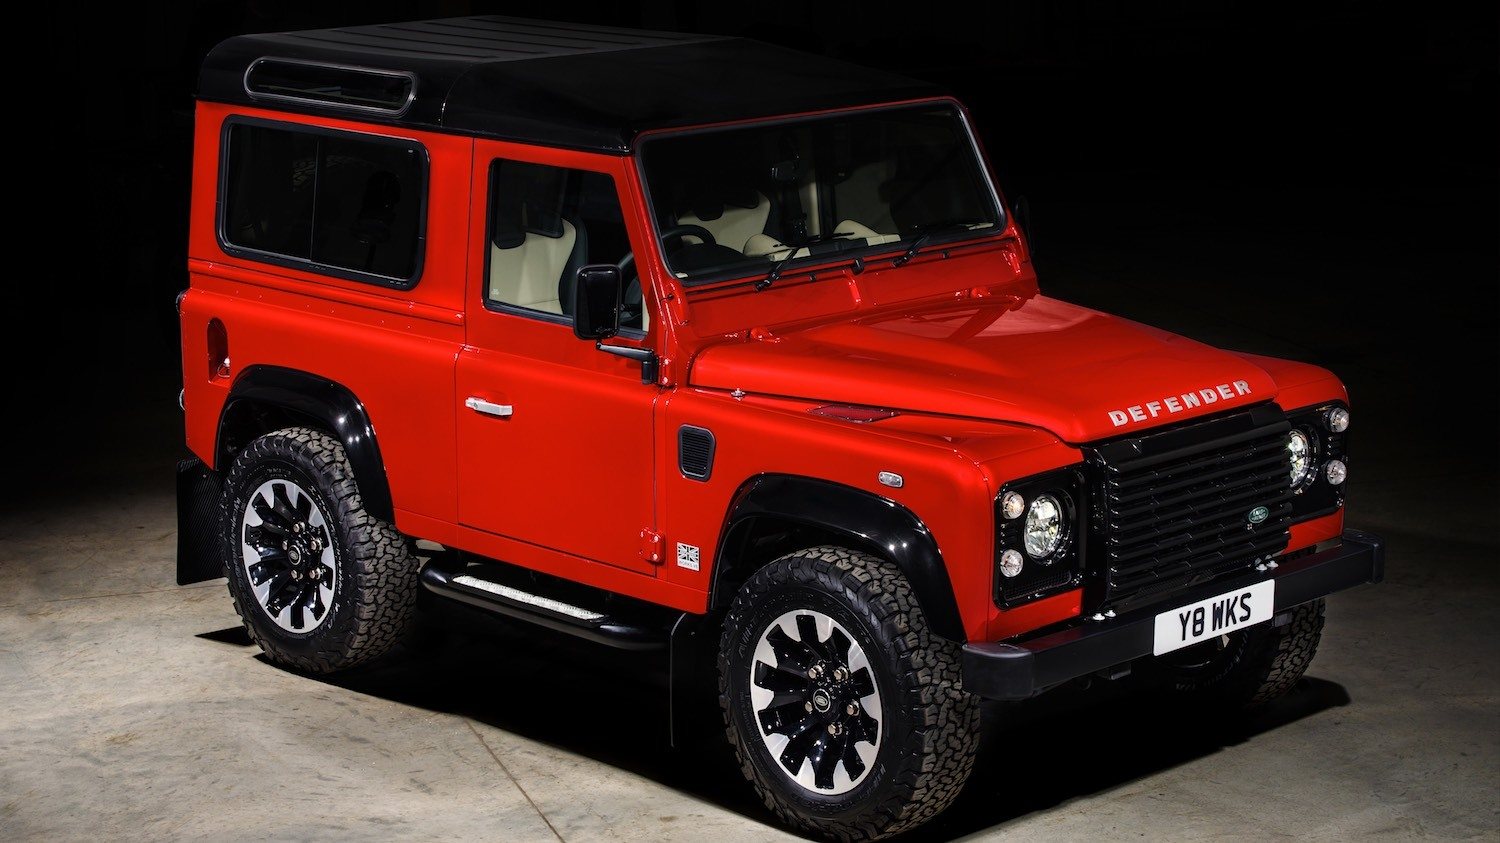 The latest 70th Edition Defender for the JPR 2018 70th Anniversary Celebrations 9